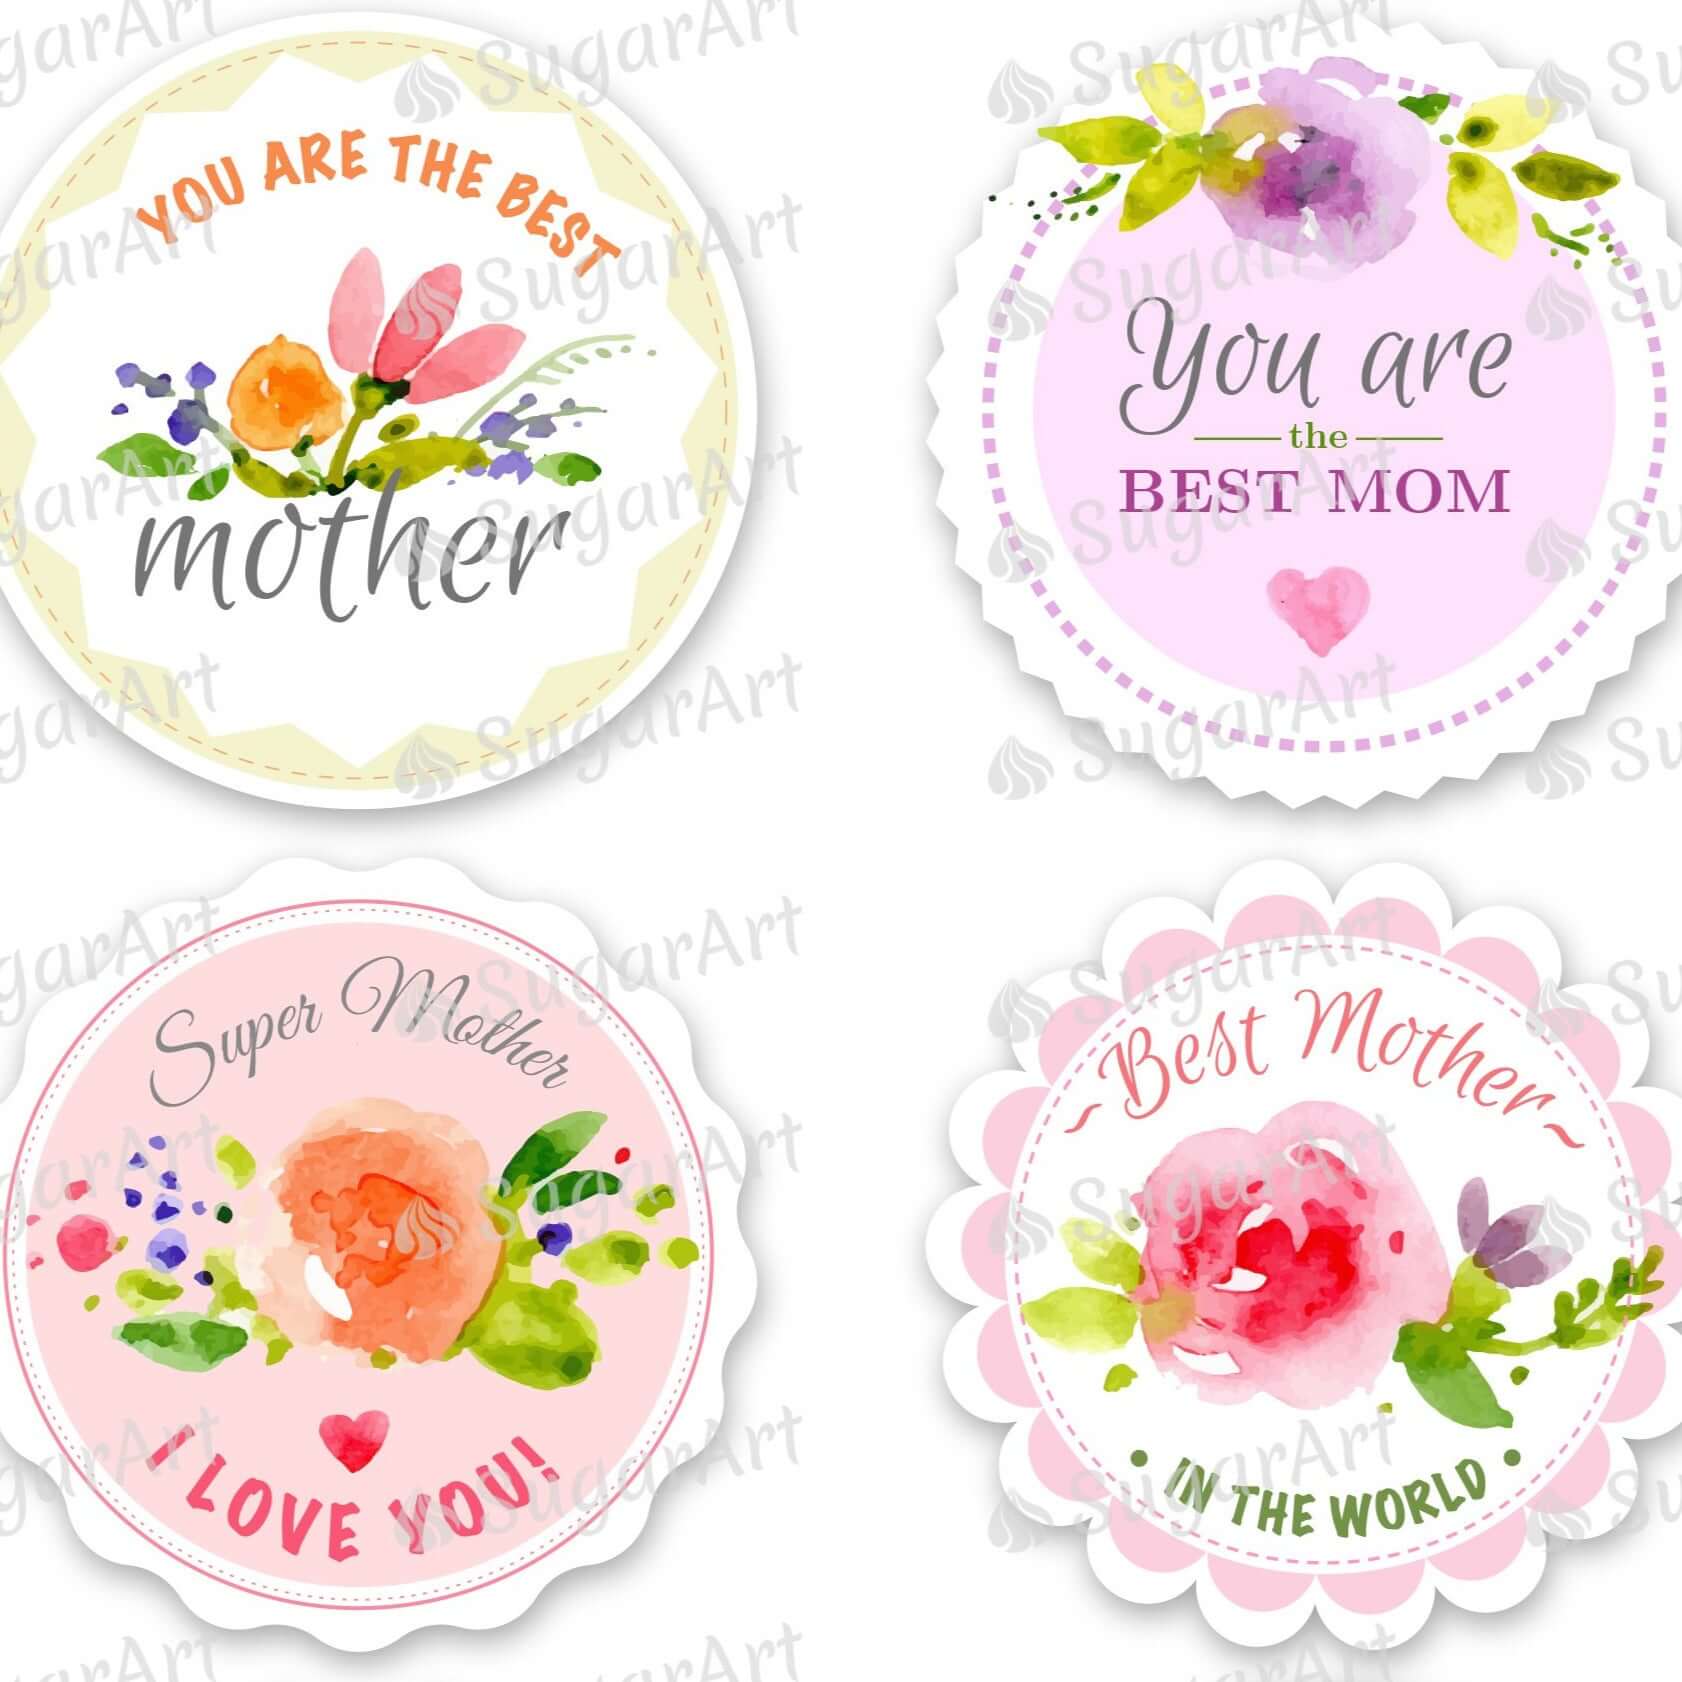 Happy Mother's Day - 9 circles 3" - Icing - ISA253.